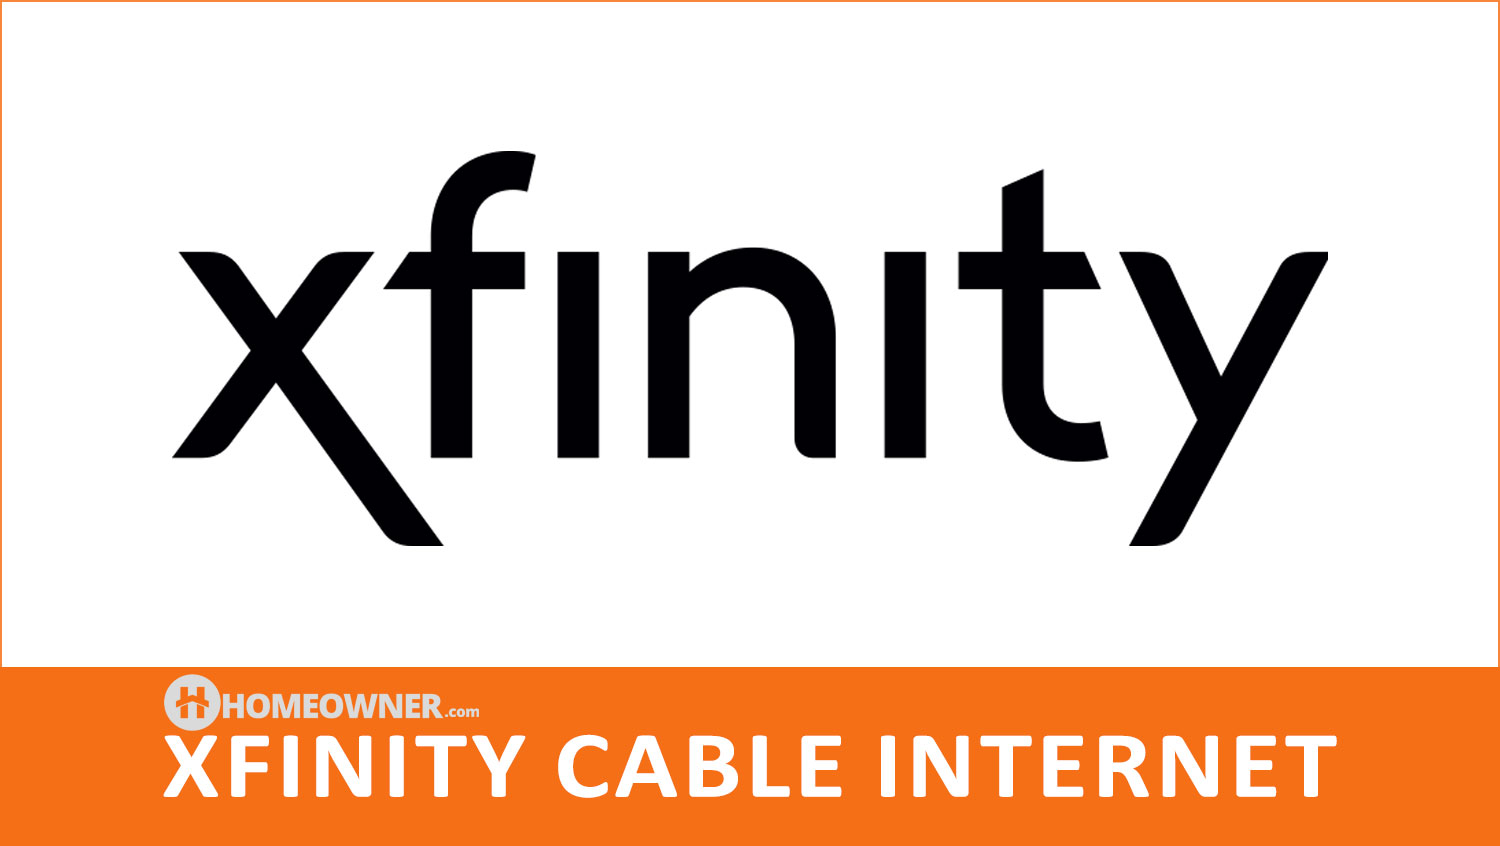 Xfinity Internet - Plans, Pricing & Options for 2023